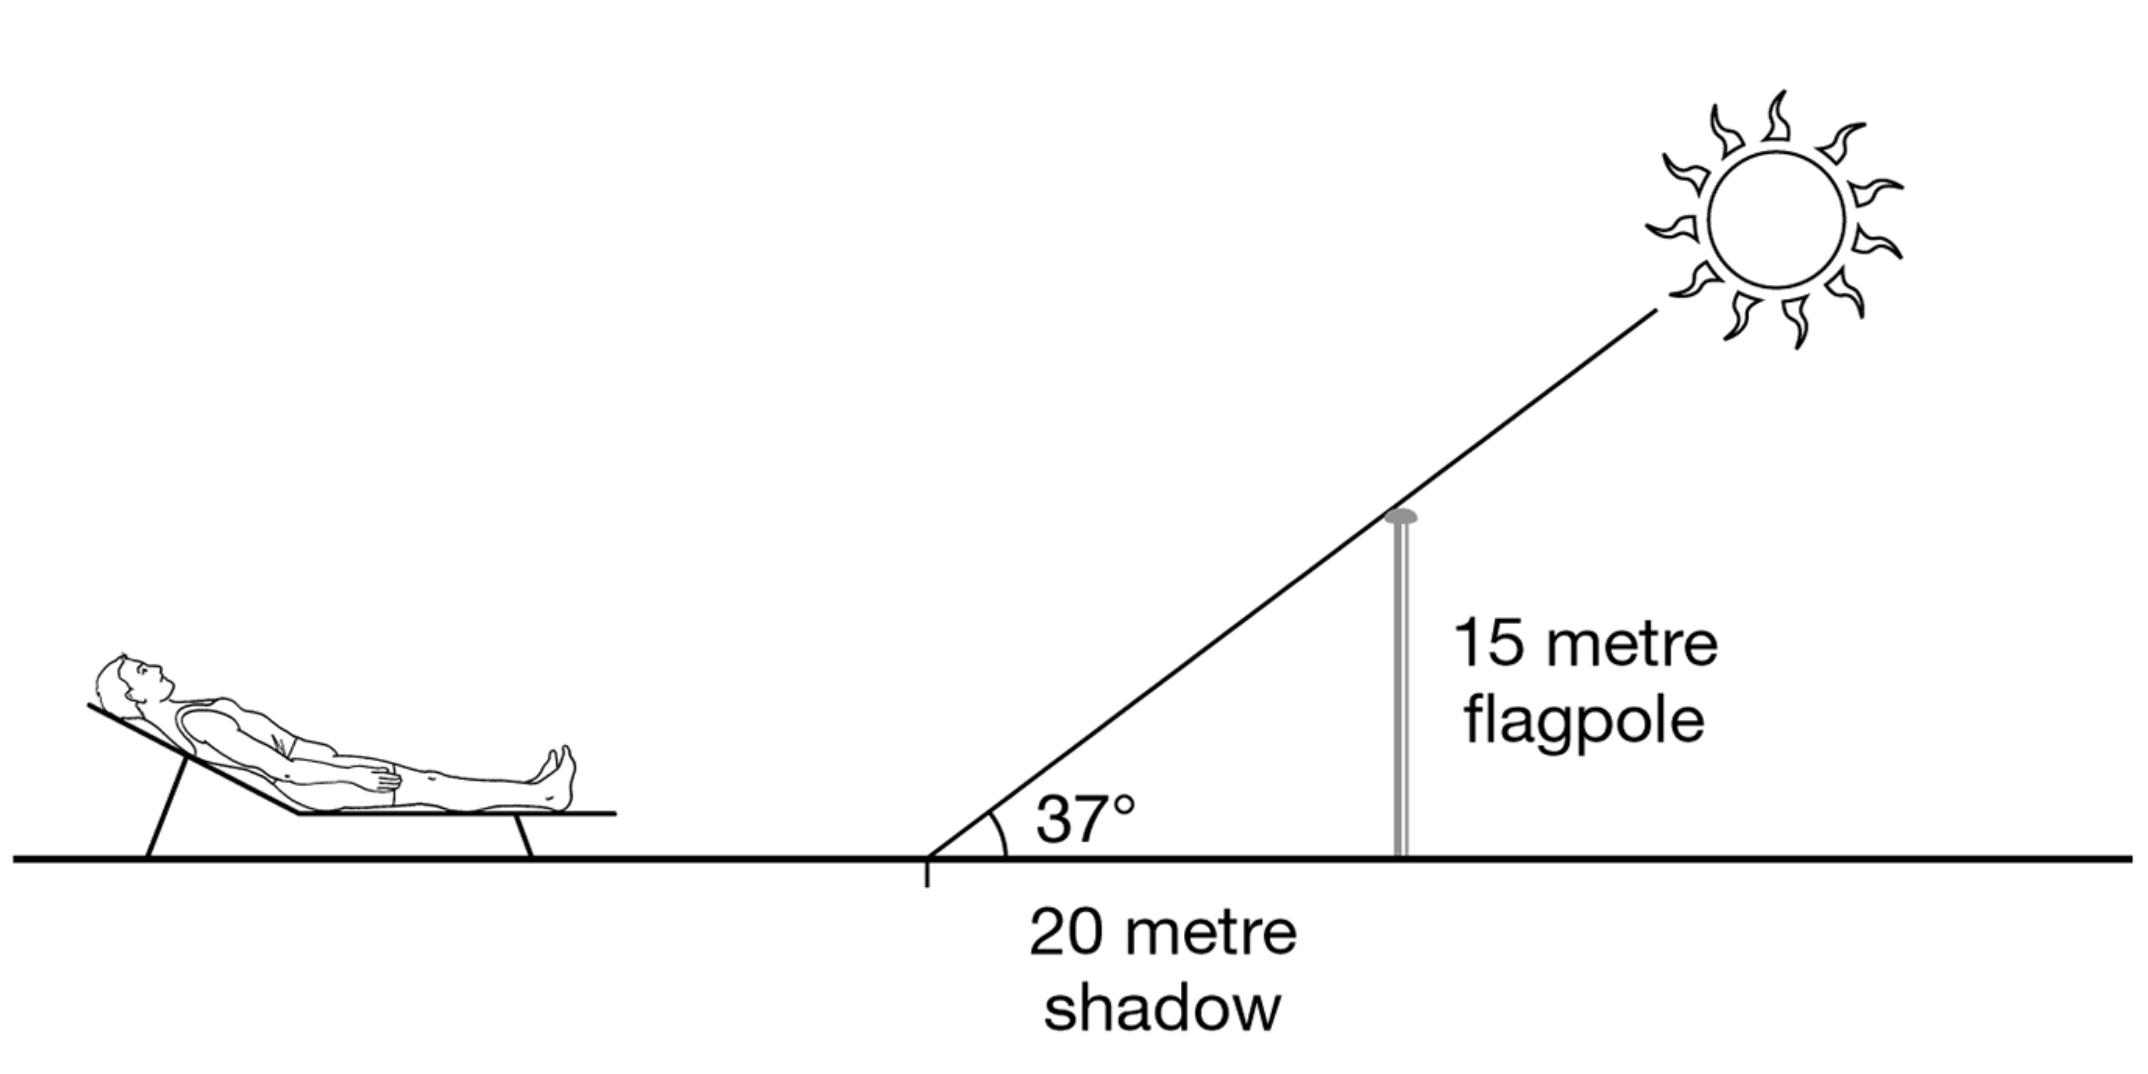 A 15-metre flagpole casts a shadow of 20 metres when the sun is 37° overhead. Figure from (Okasha 2016).